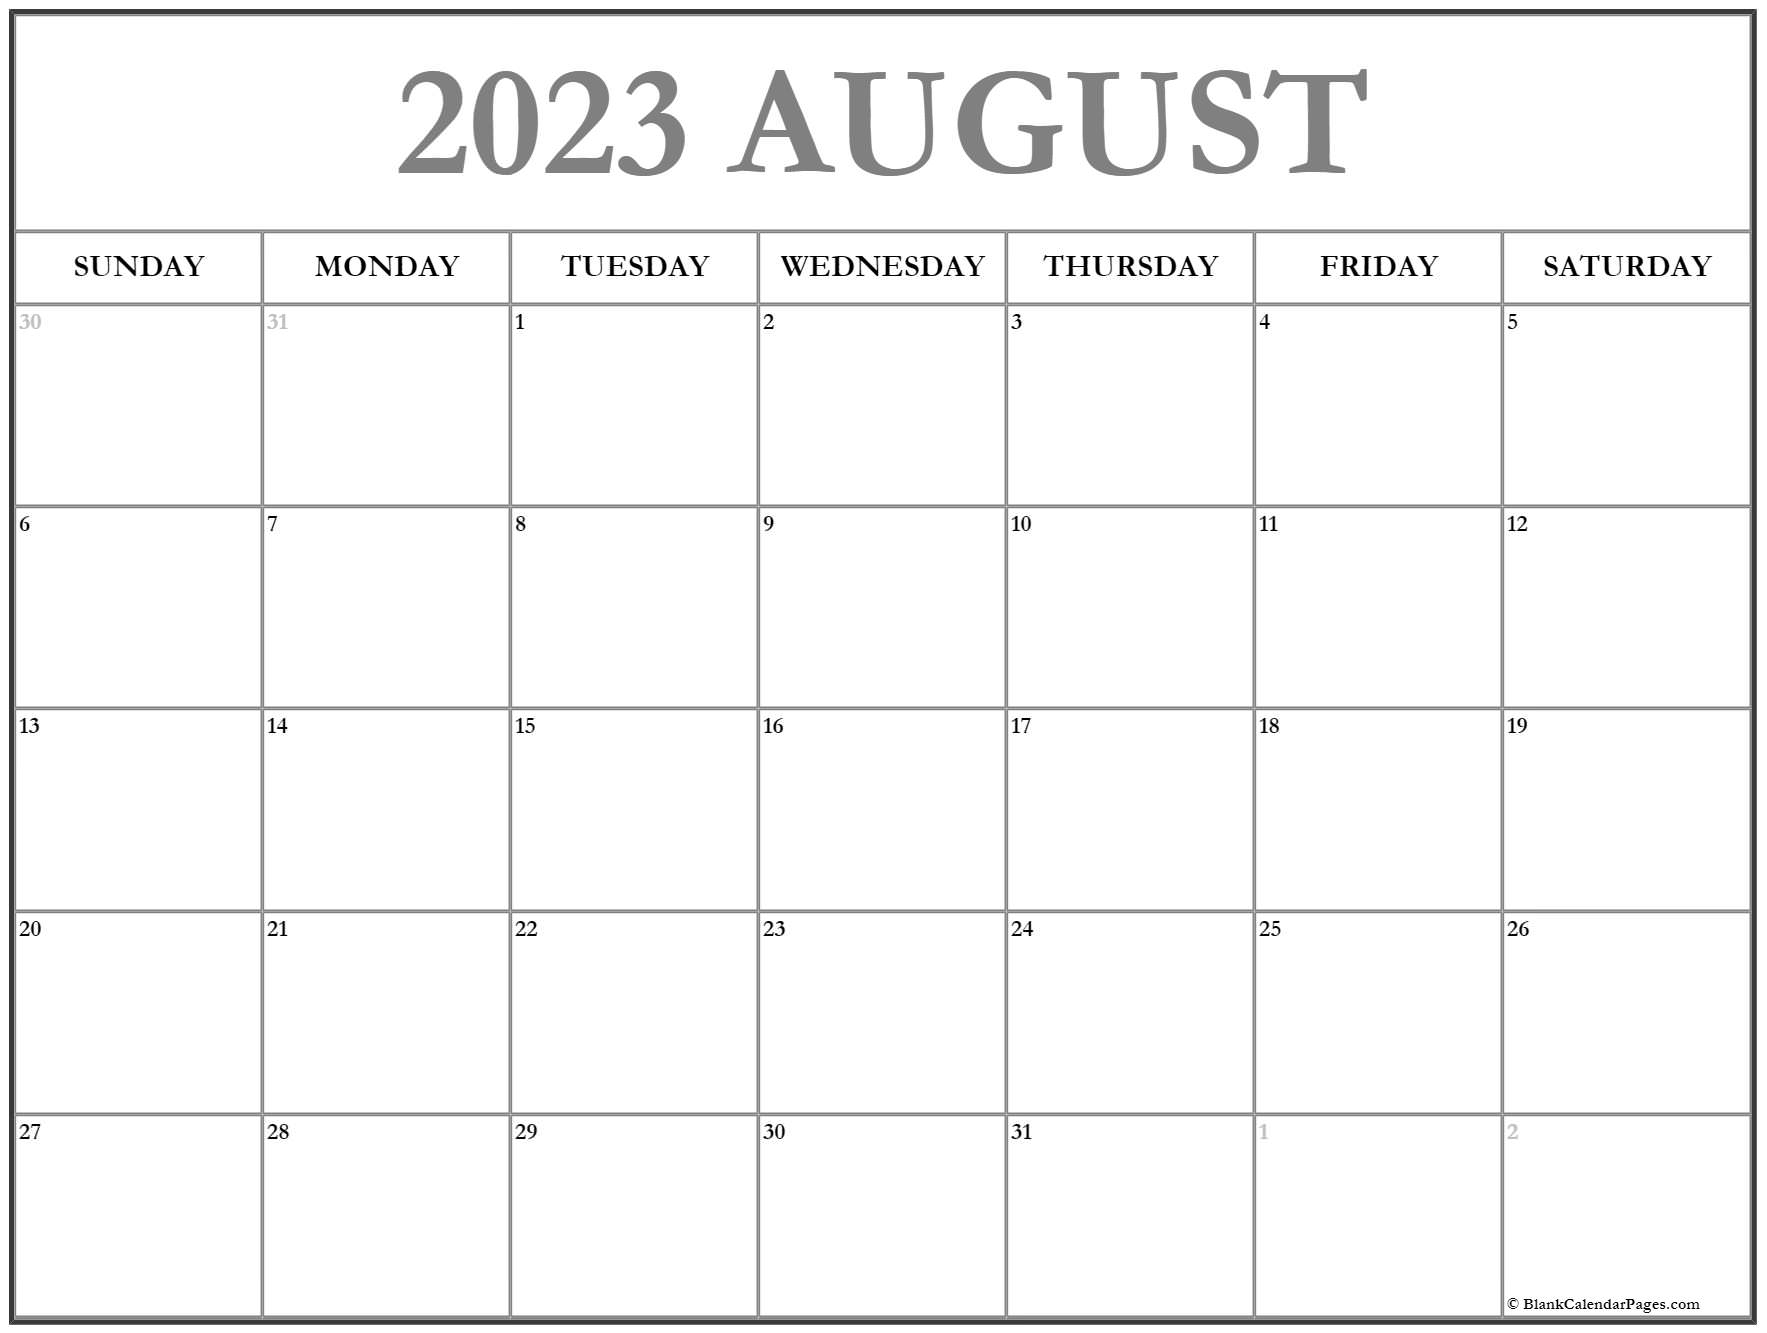 august-2023-calendar-of-the-month-free-printable-august-calendar-of